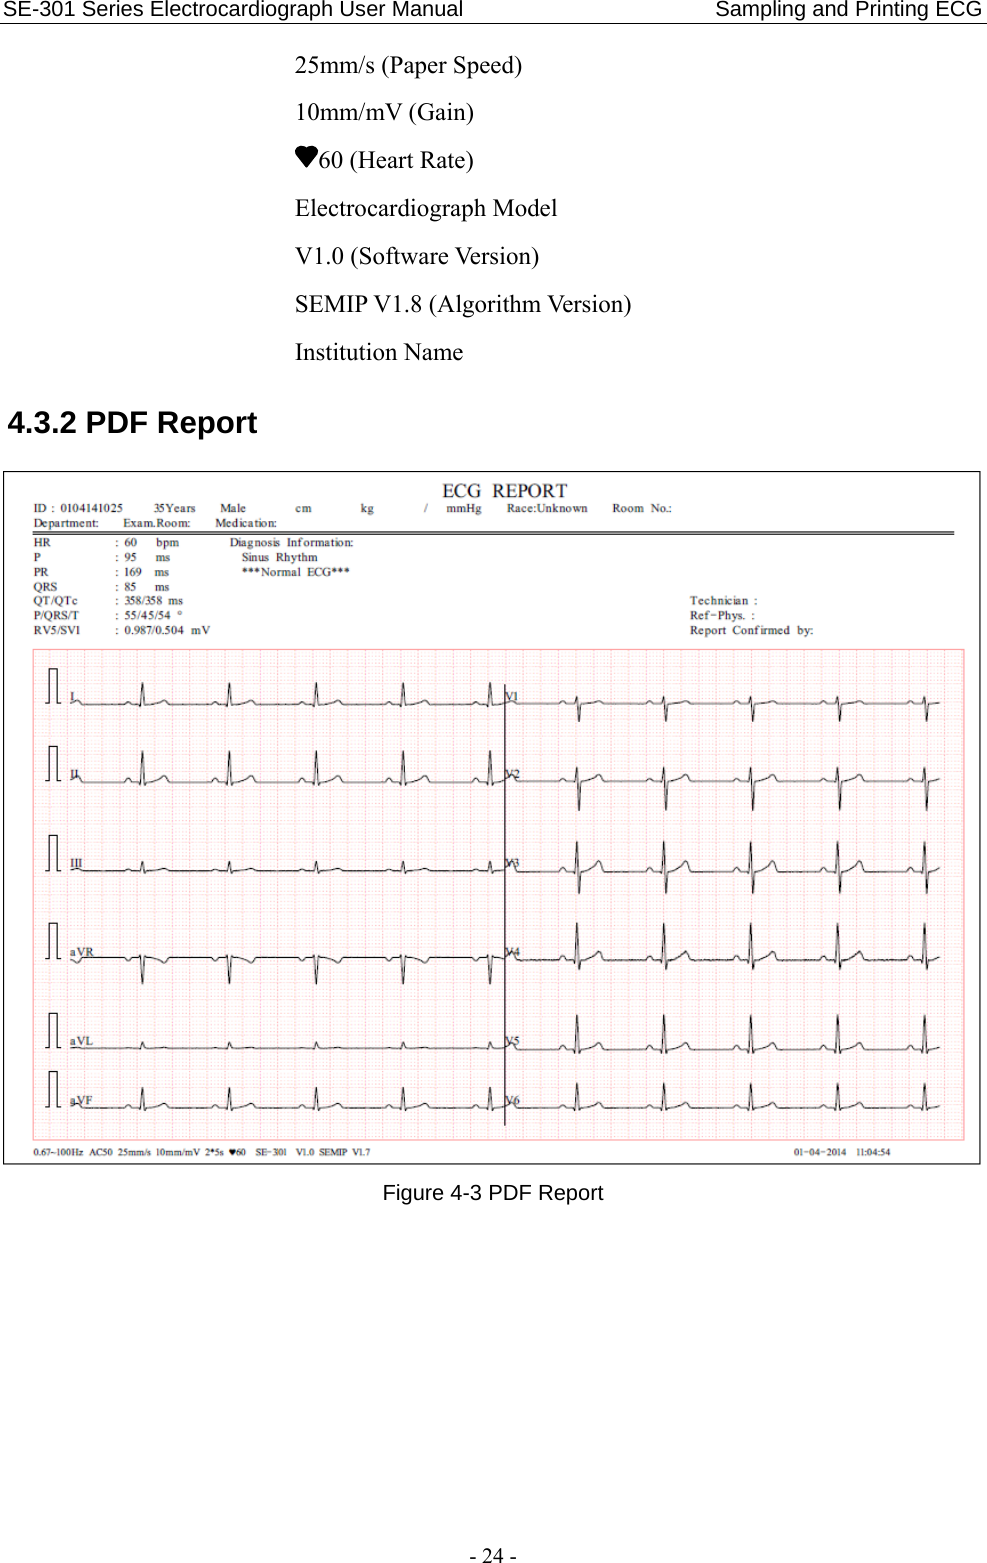 SE-301 Series Electrocardiograph User Manual                       Sampling and Printing ECG - 24 - 25mm/s (Paper Speed) 10mm/mV (Gain) 60 (Heart Rate) Electrocardiograph Model V1.0 (Software Version) SEMIP V1.8 (Algorithm Version) Institution Name 4.3.2 PDF Report  Figure 4-3 PDF Report  